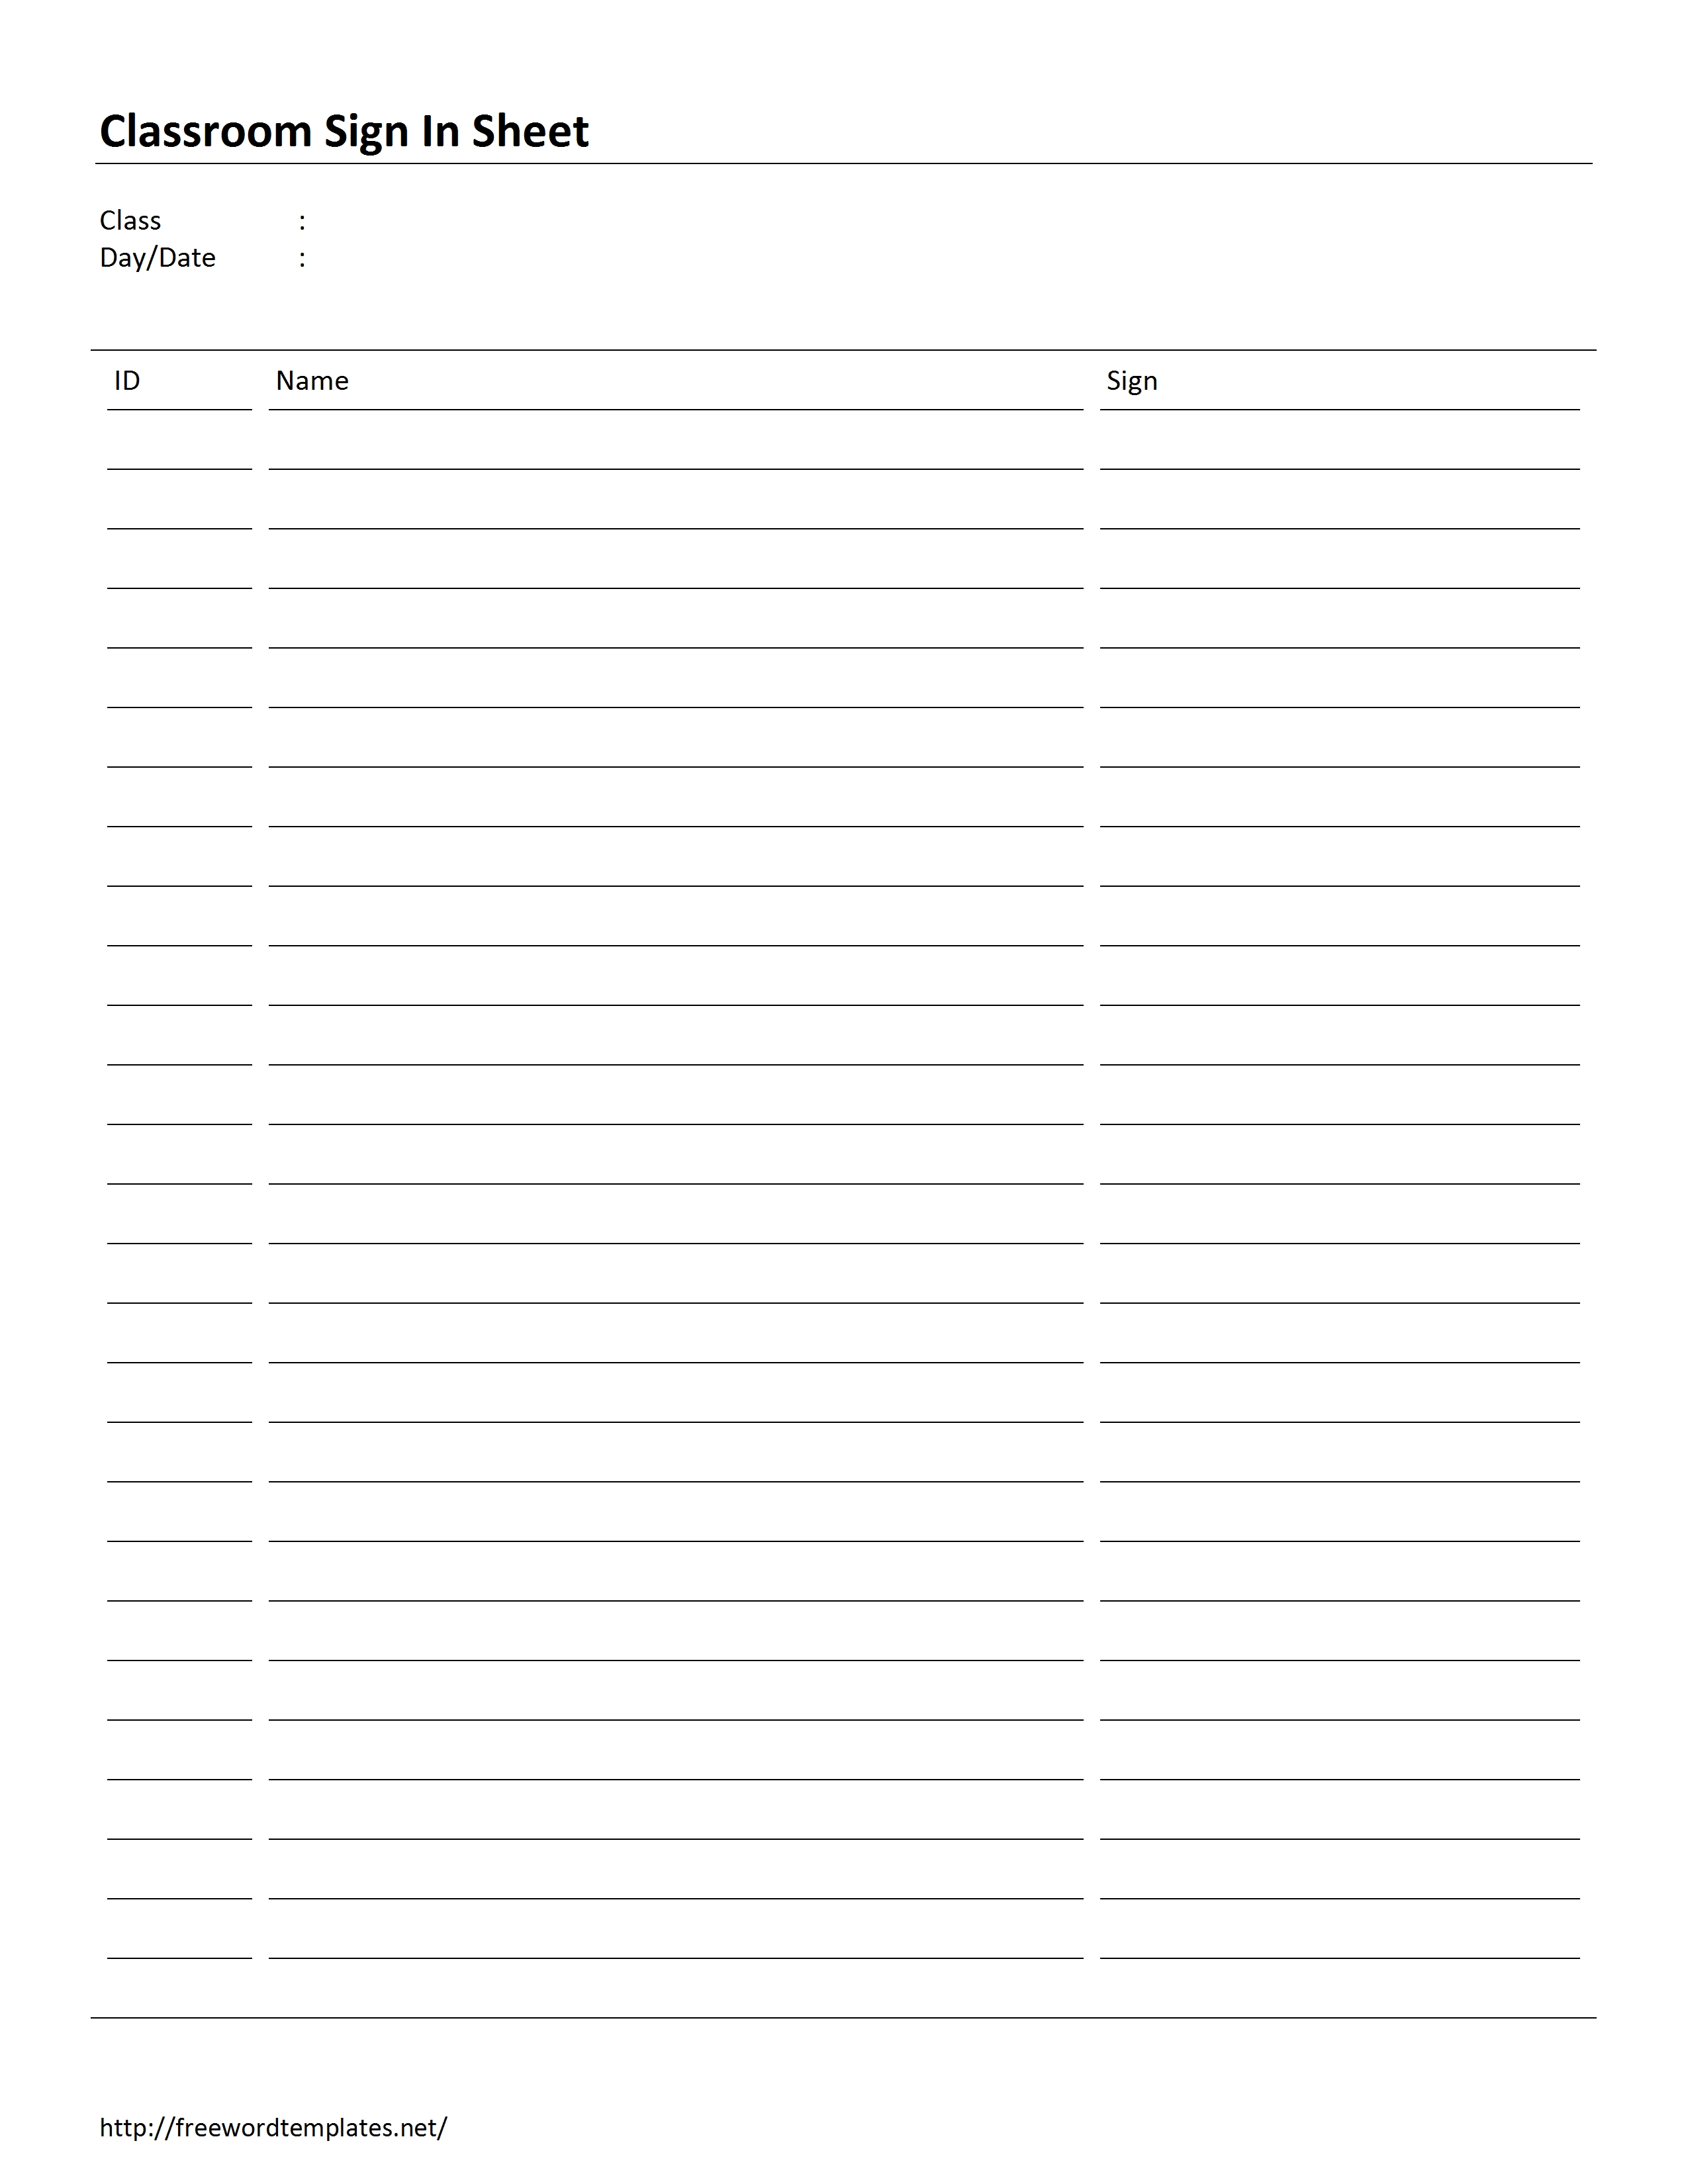 sign-in-sheet-template-word-free-free-downloadable-and-printable-sign-in-sheet-templates-that